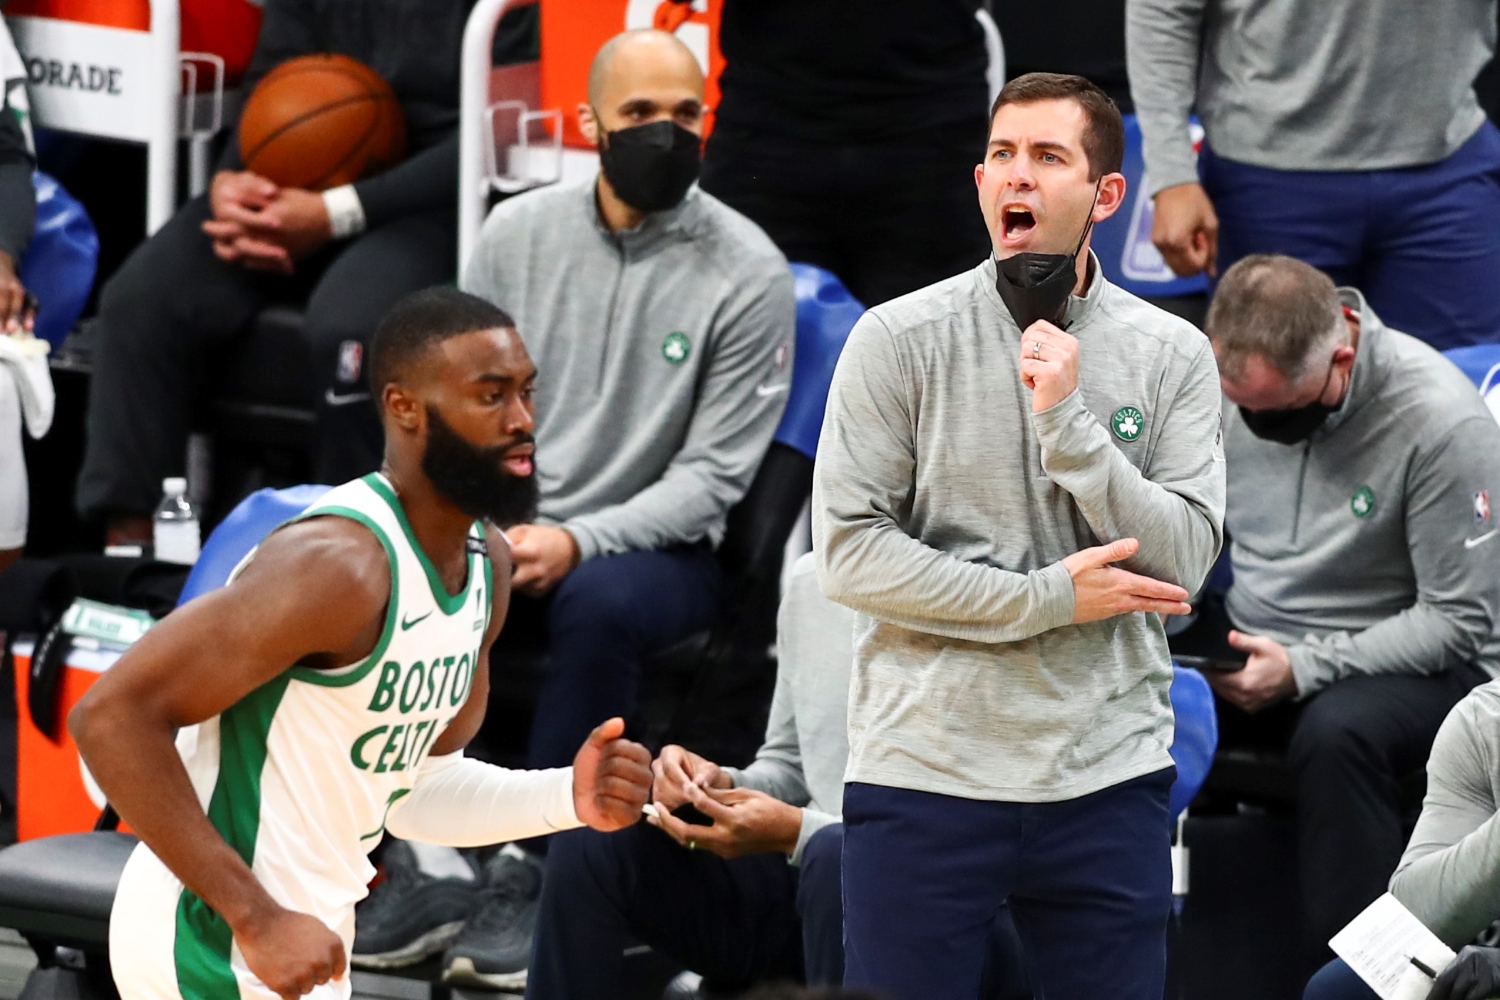 Head Coach Brad Stevens of the Boston Celtics lowers his mask to speak during a game against the Los Angeles Clippers at TD Garden on March 2, 2021.